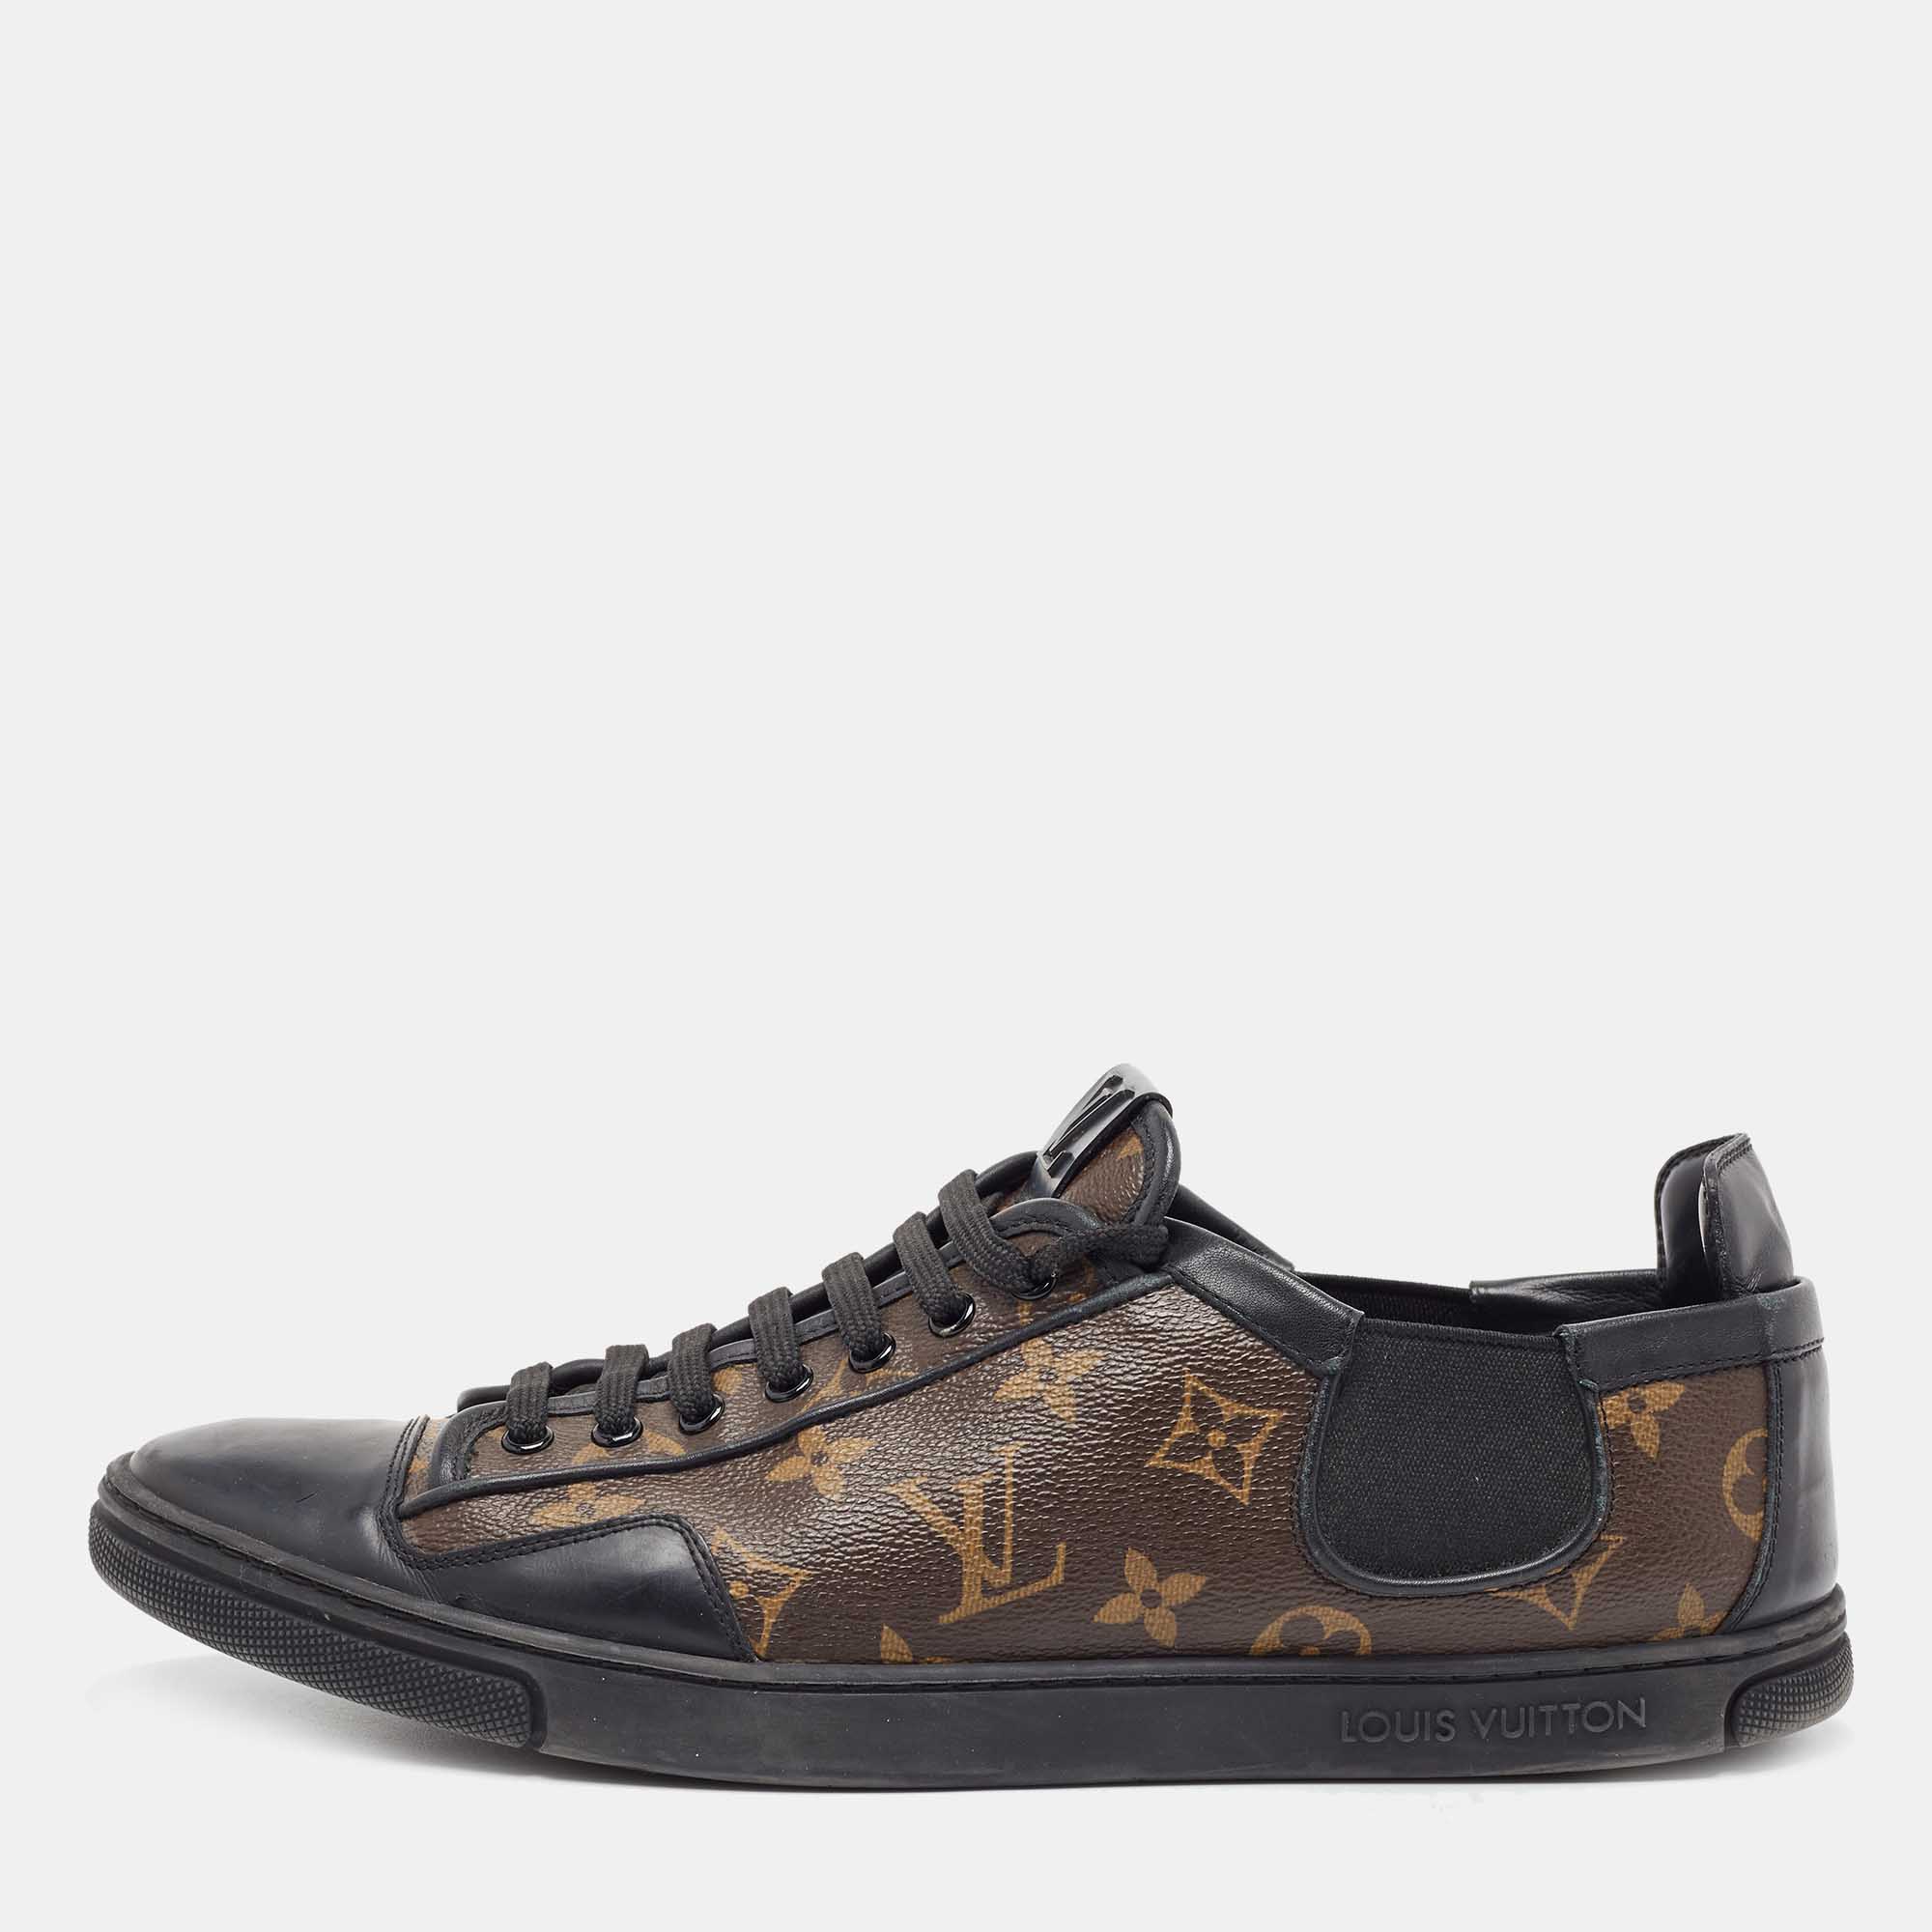 Pre-owned Louis Vuitton Brown Monogram Canvas Slalom Low Top Sneakers Size 42.5